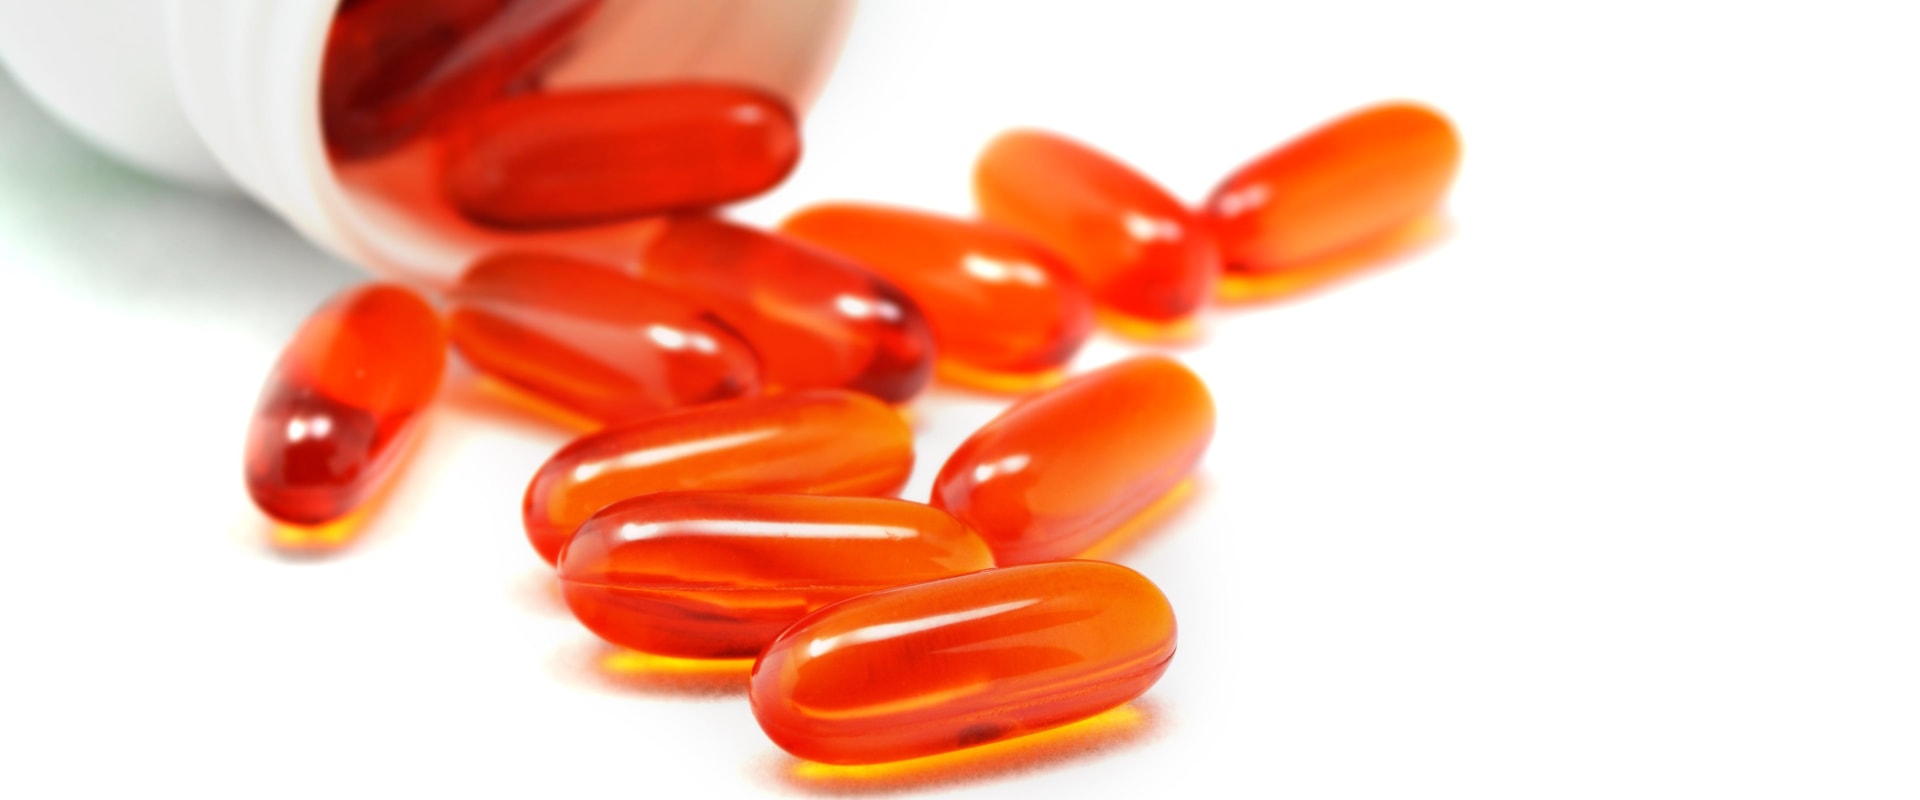 Can i take health supplements with other medications?